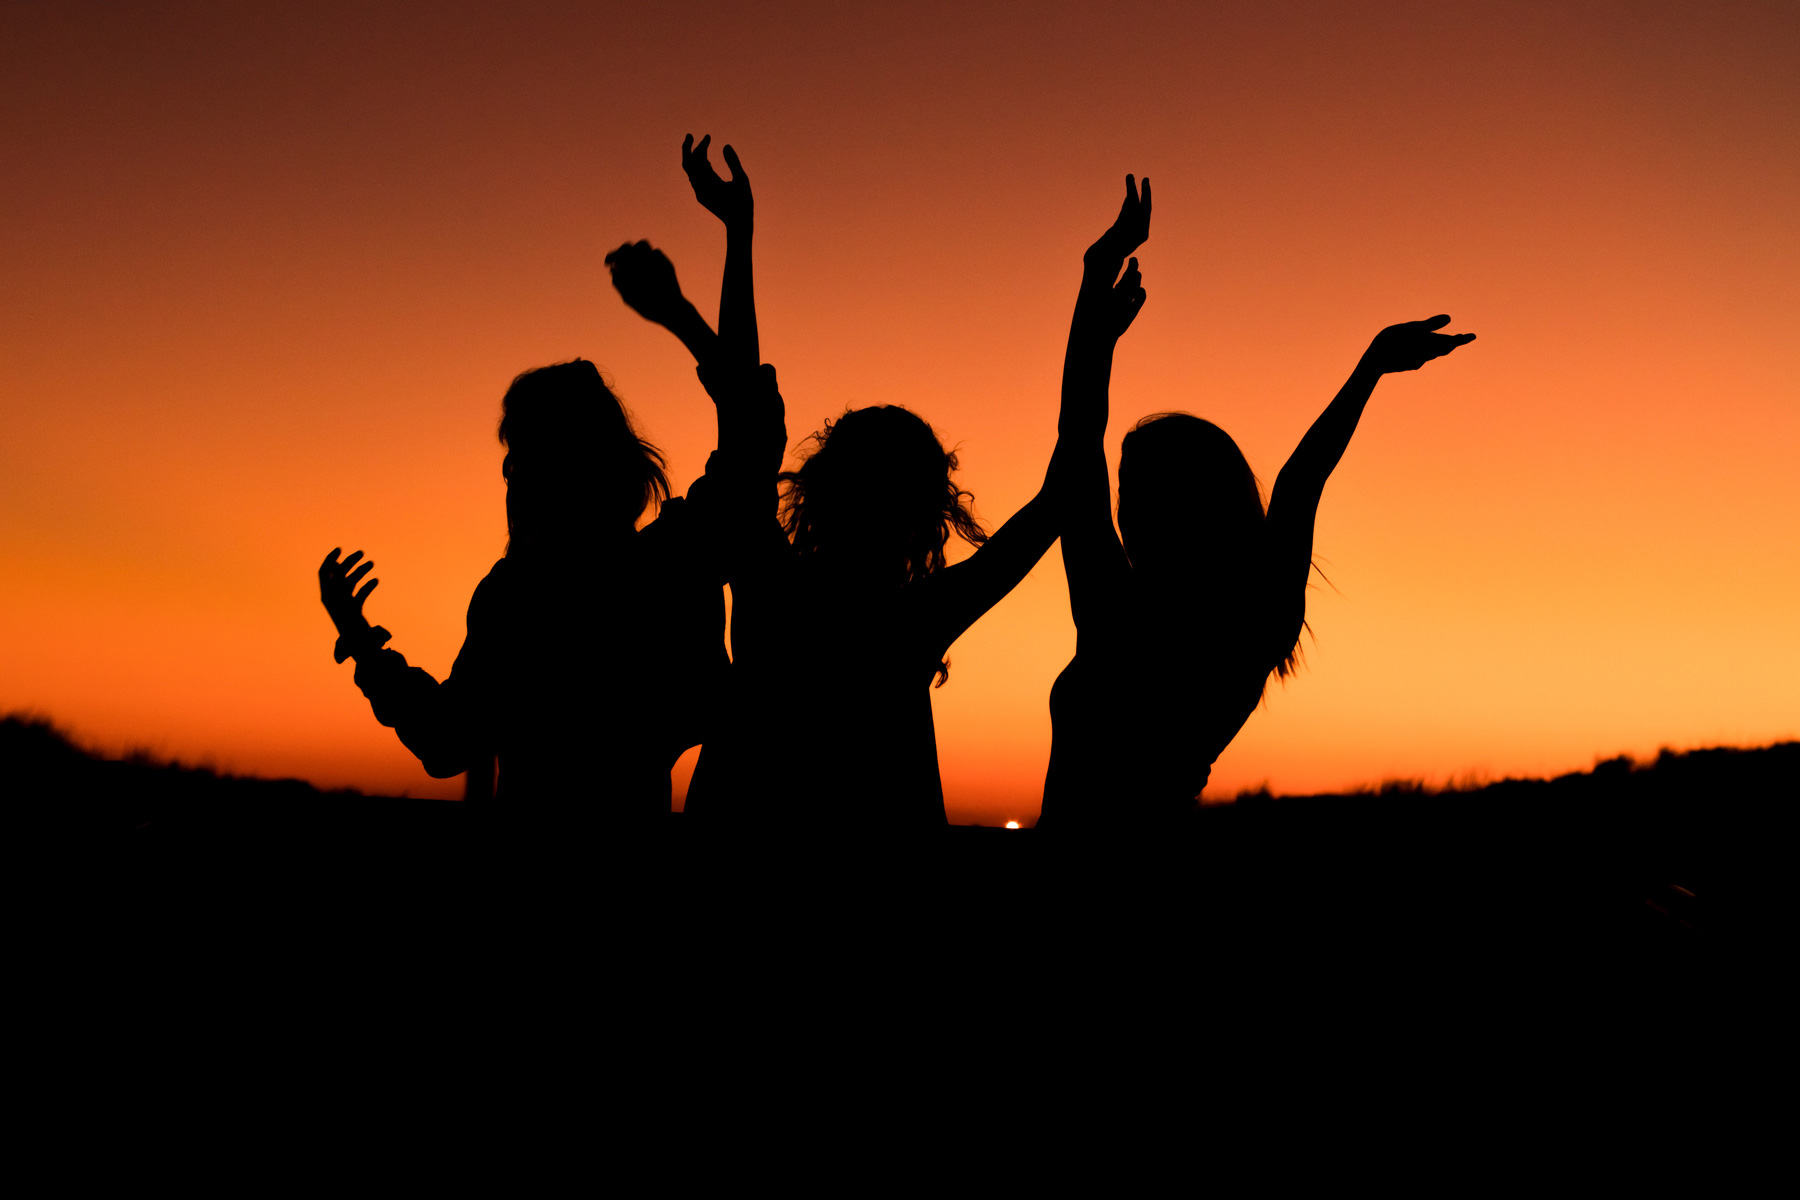 A photo of a silhouette of three people dancing as the sun sets